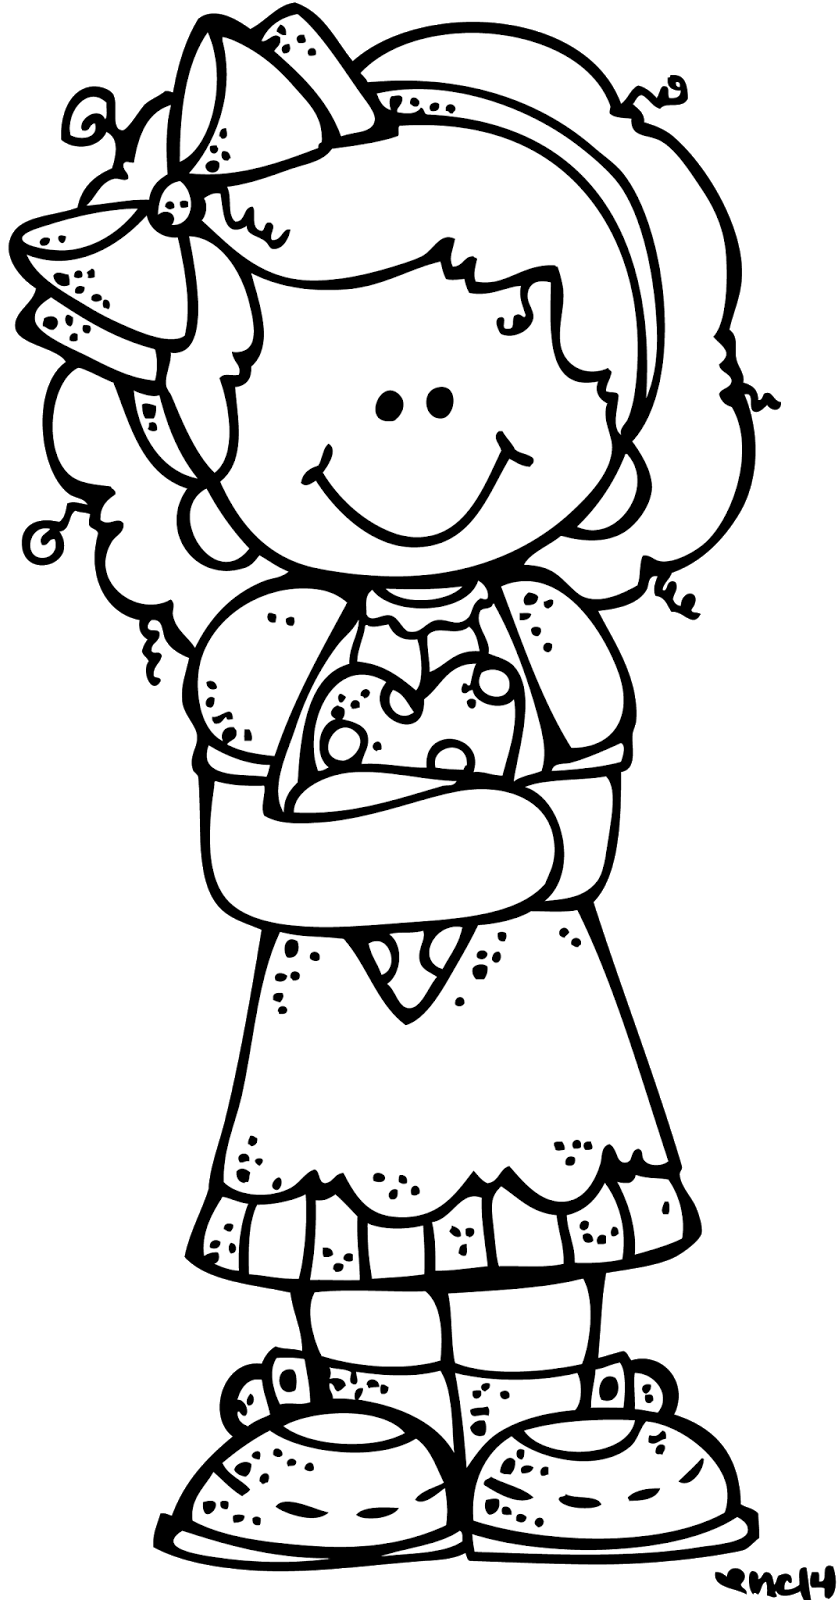 primary boy and girl clipart - photo #46